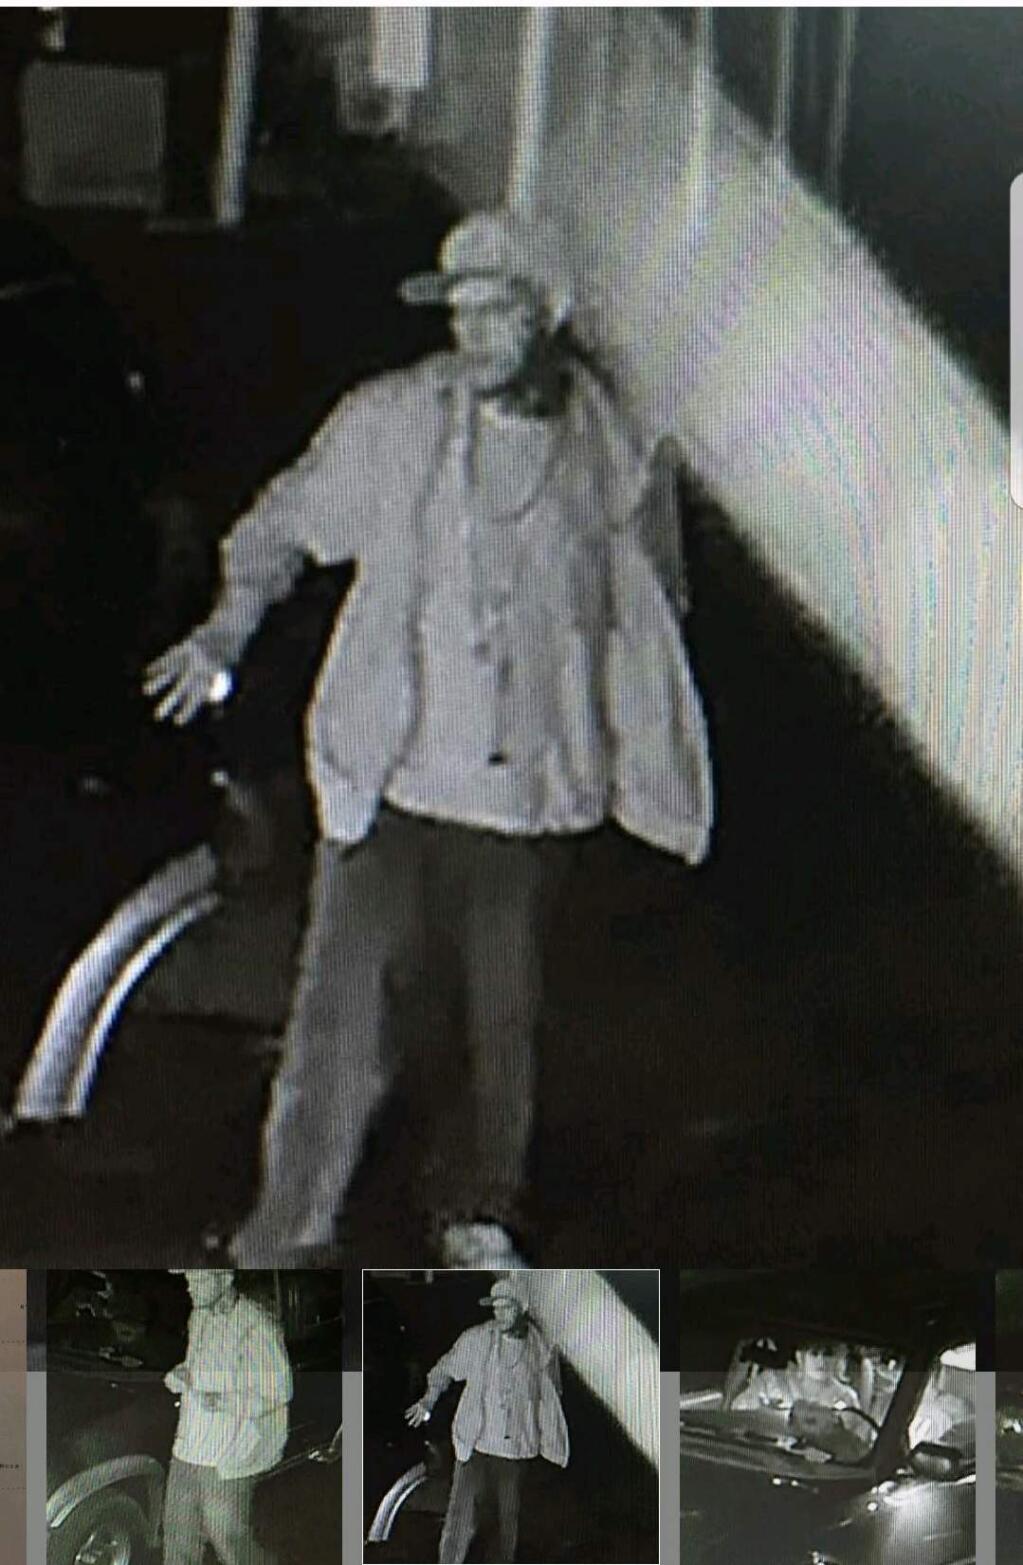 Petaluma police Friday released this image of a man suspected of attempting to break into a payment drop box at Petaluma's KOA campground. (Petaulma Police Department)